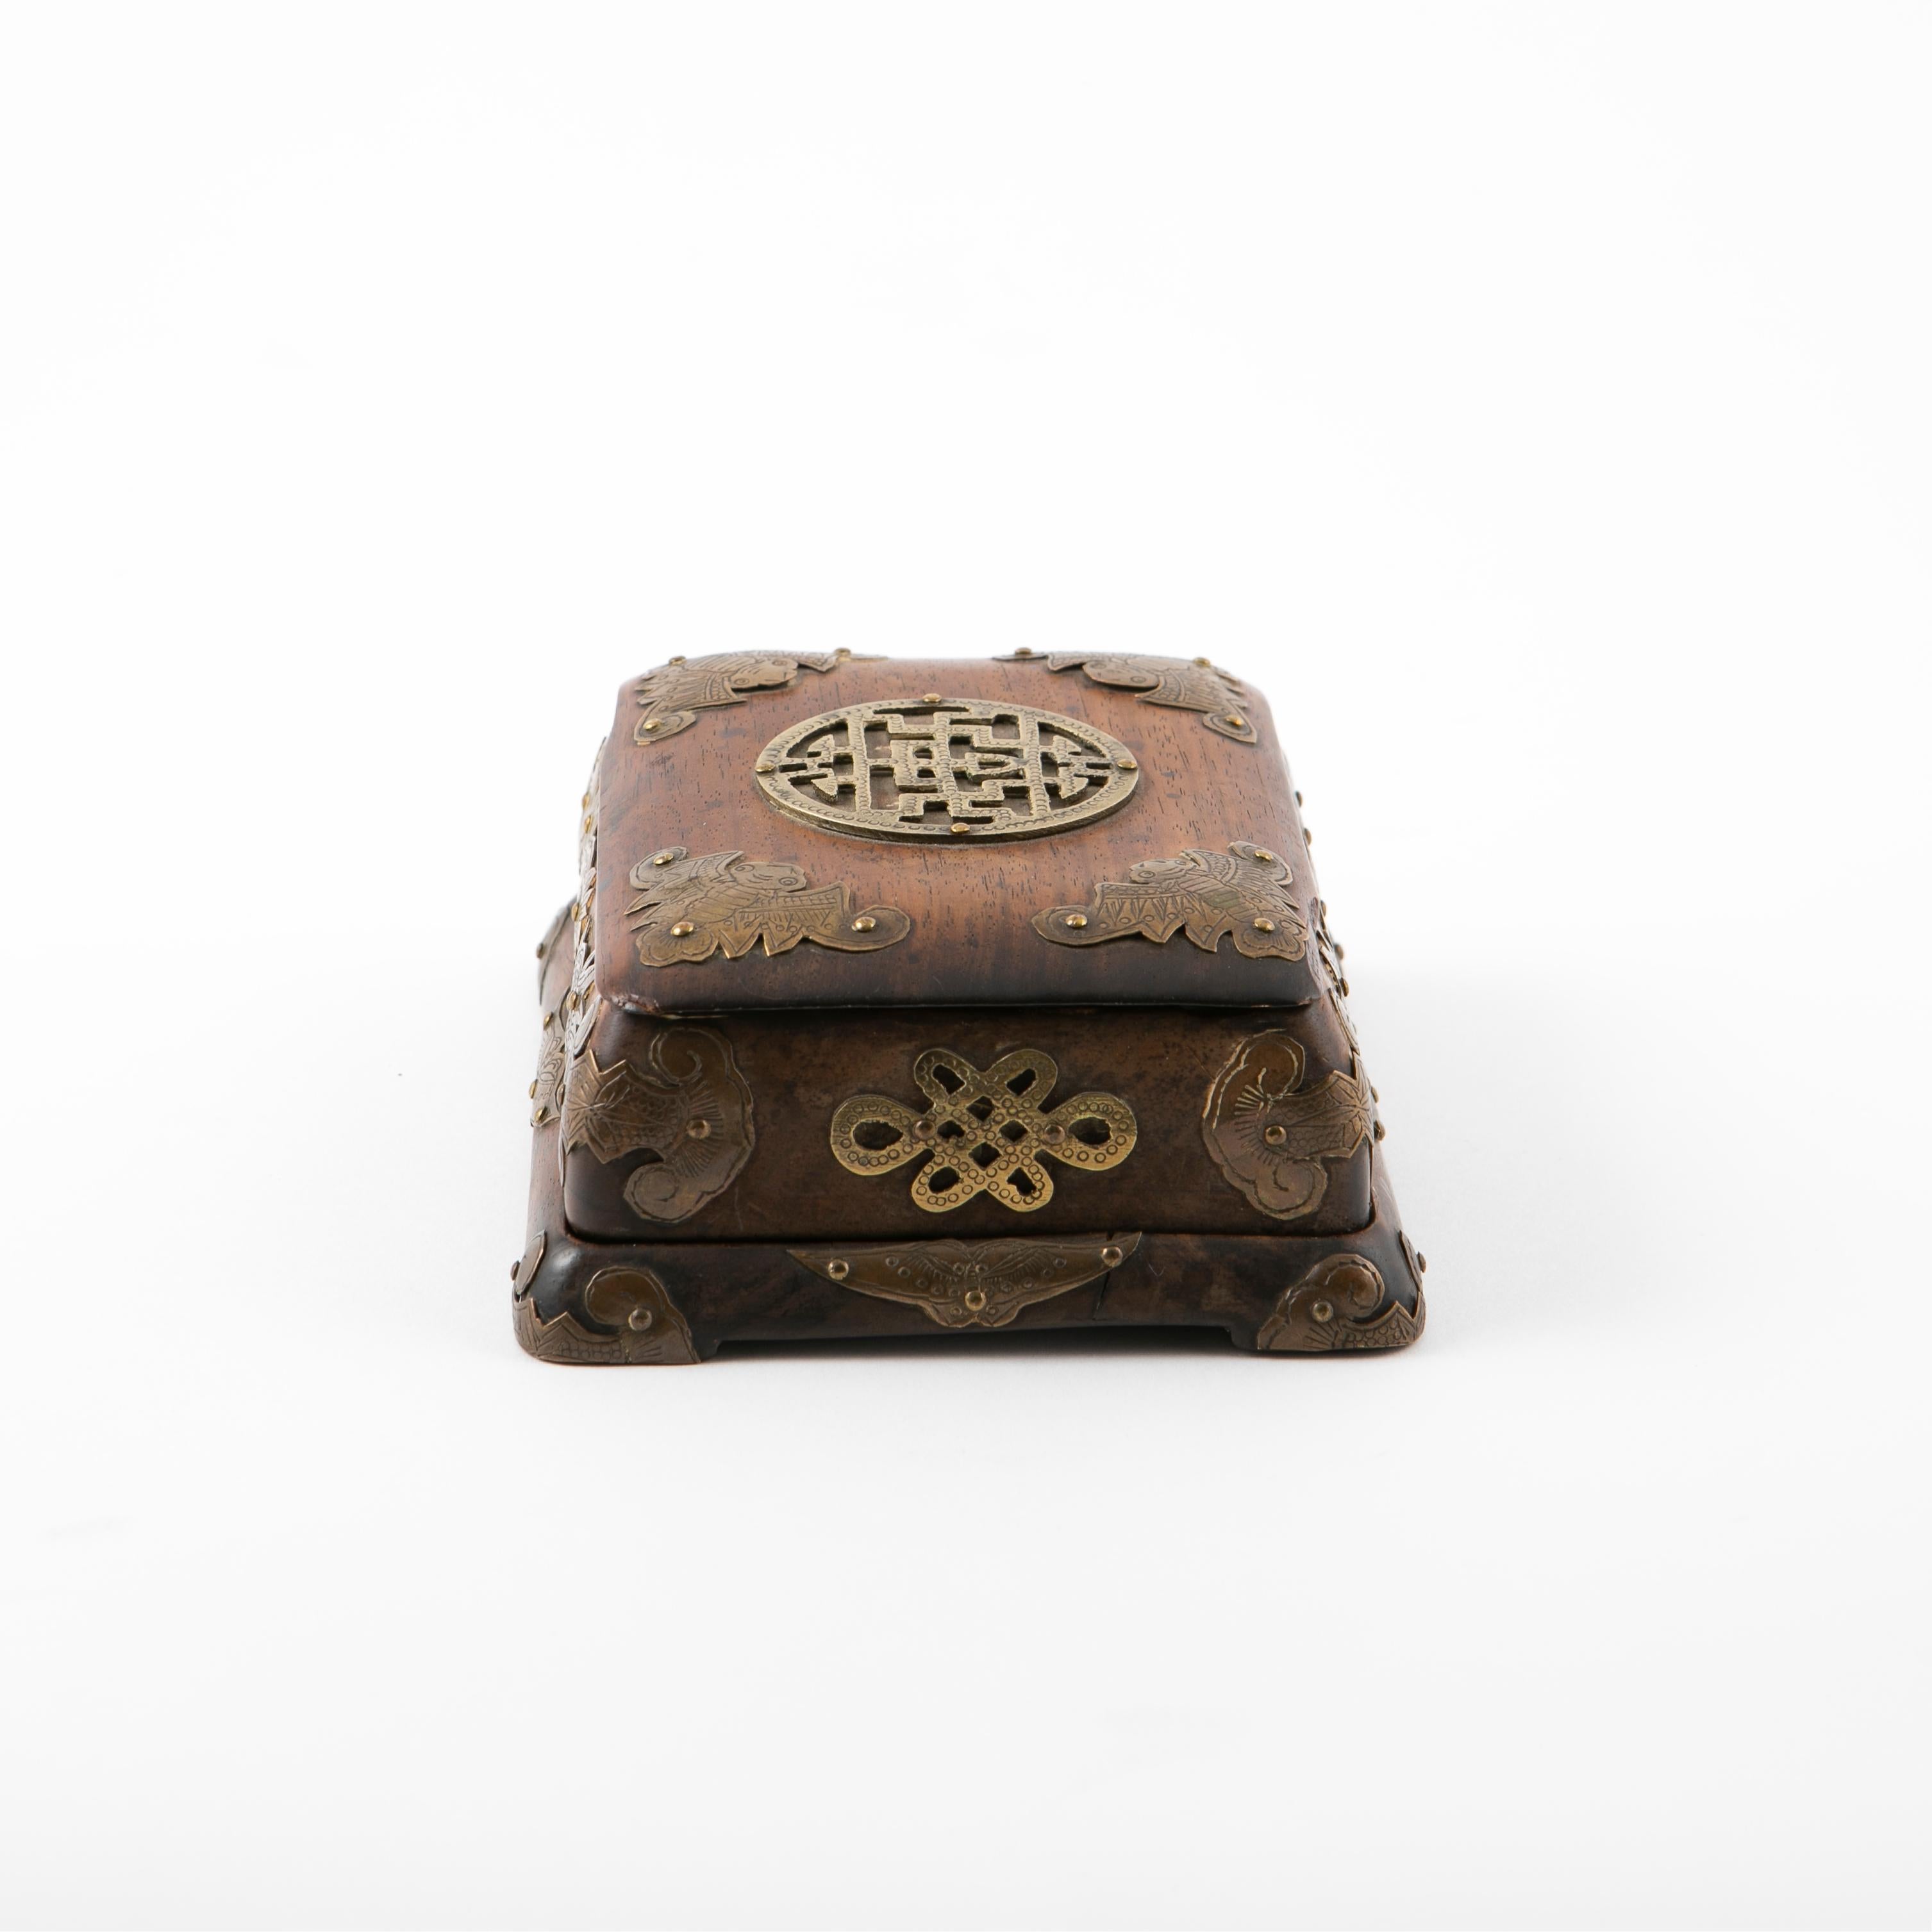 Chinese Huanghuali wood box decorated with bronze mountings and motifs of bats, fish and moths.
The top features a classic Chinese medallion mounted to the centre of the lid.
In untouched and original condition.

Minor chipping on the lid and on